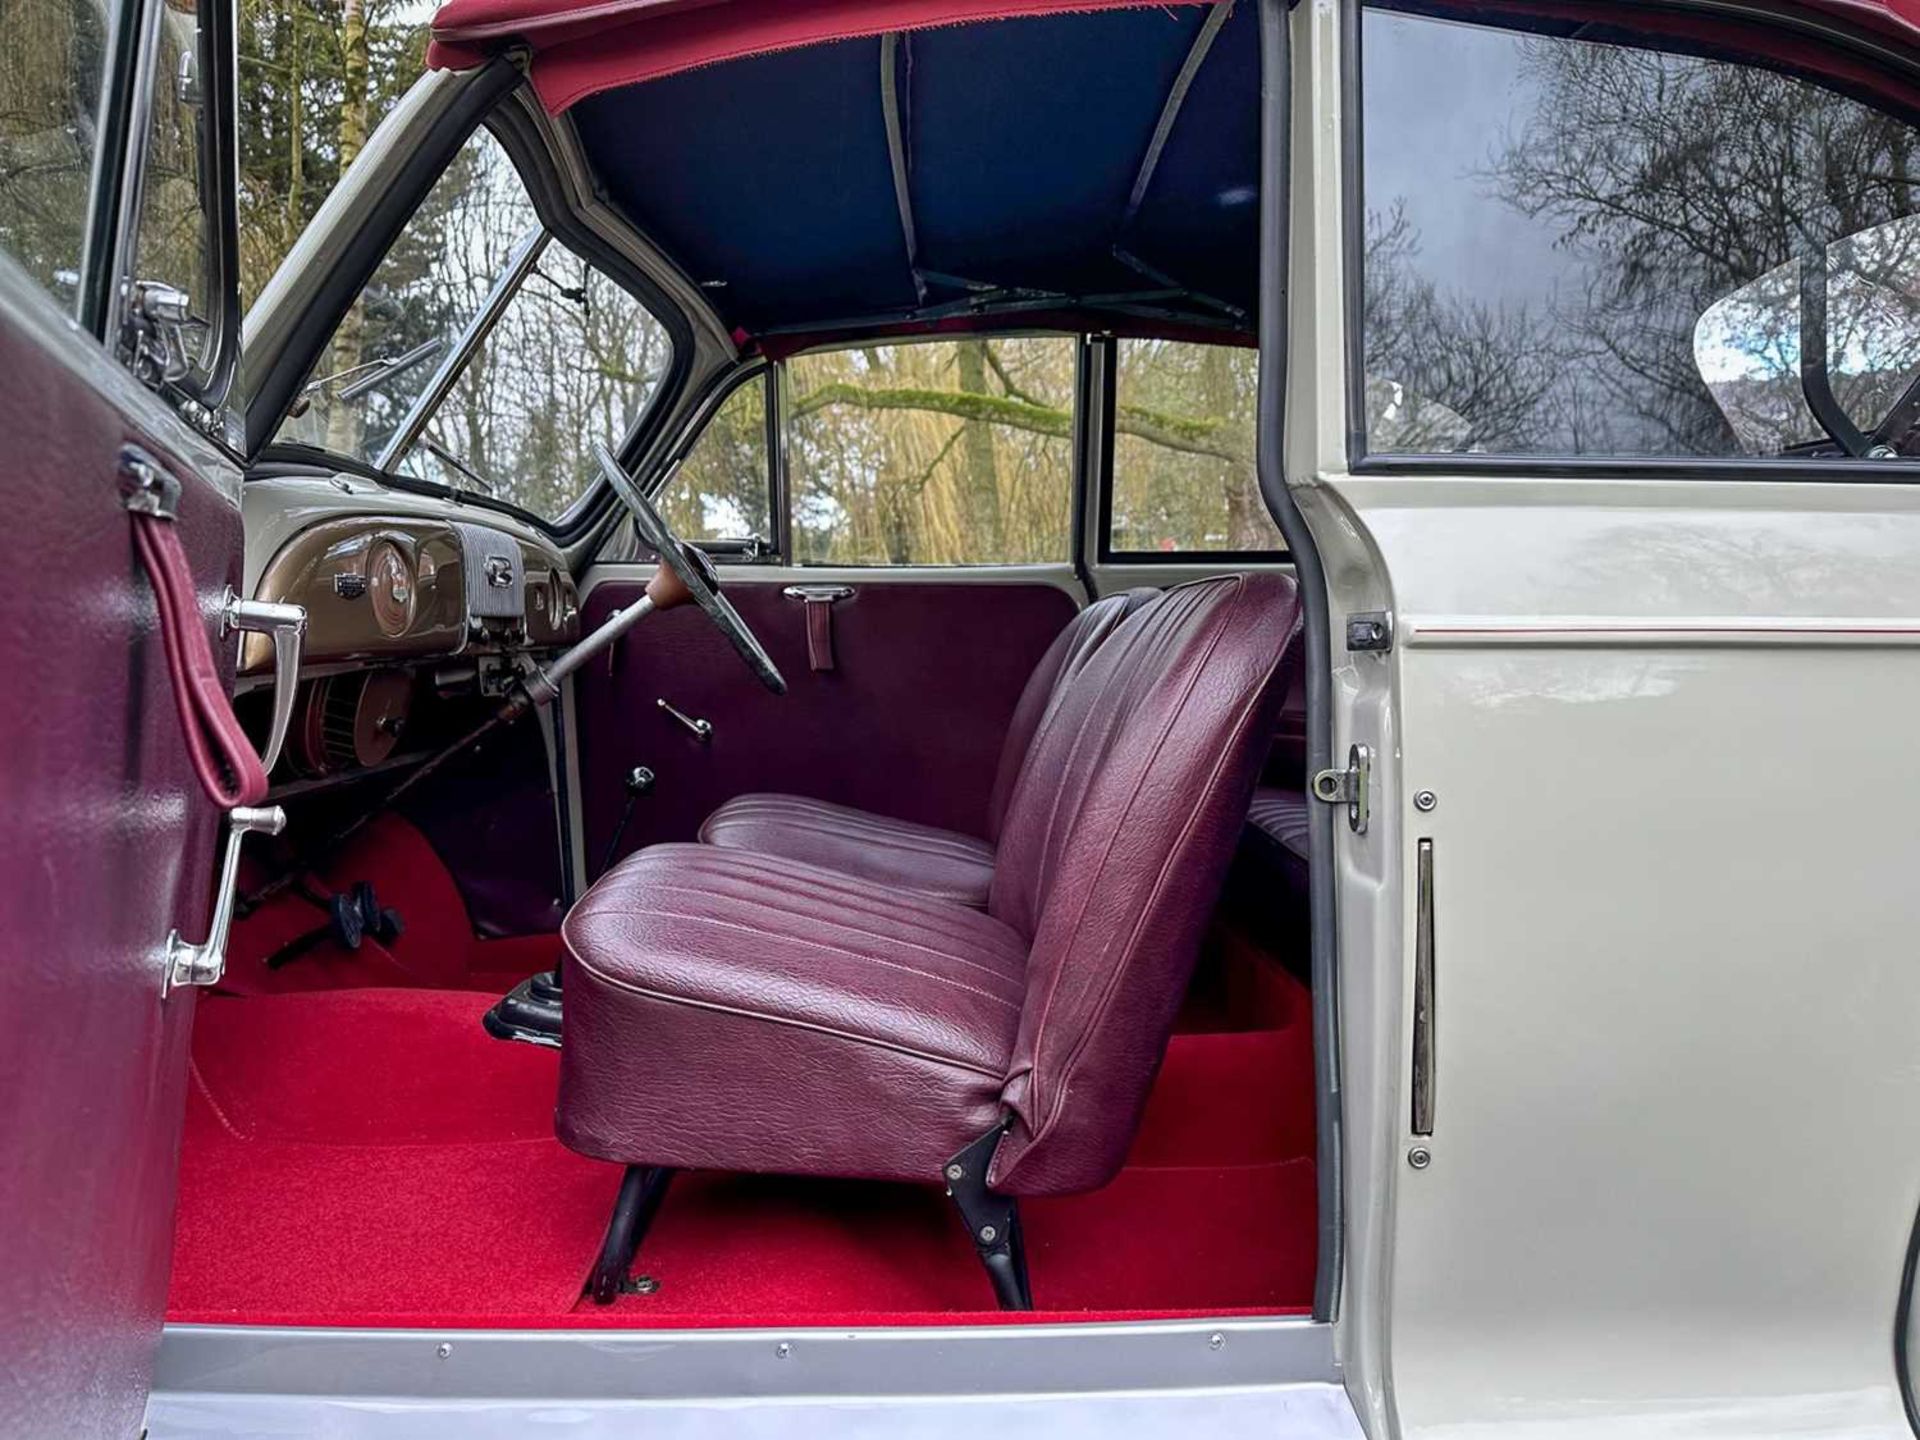 1954 Morris Minor Tourer Fully restored to concours standard - Image 47 of 100